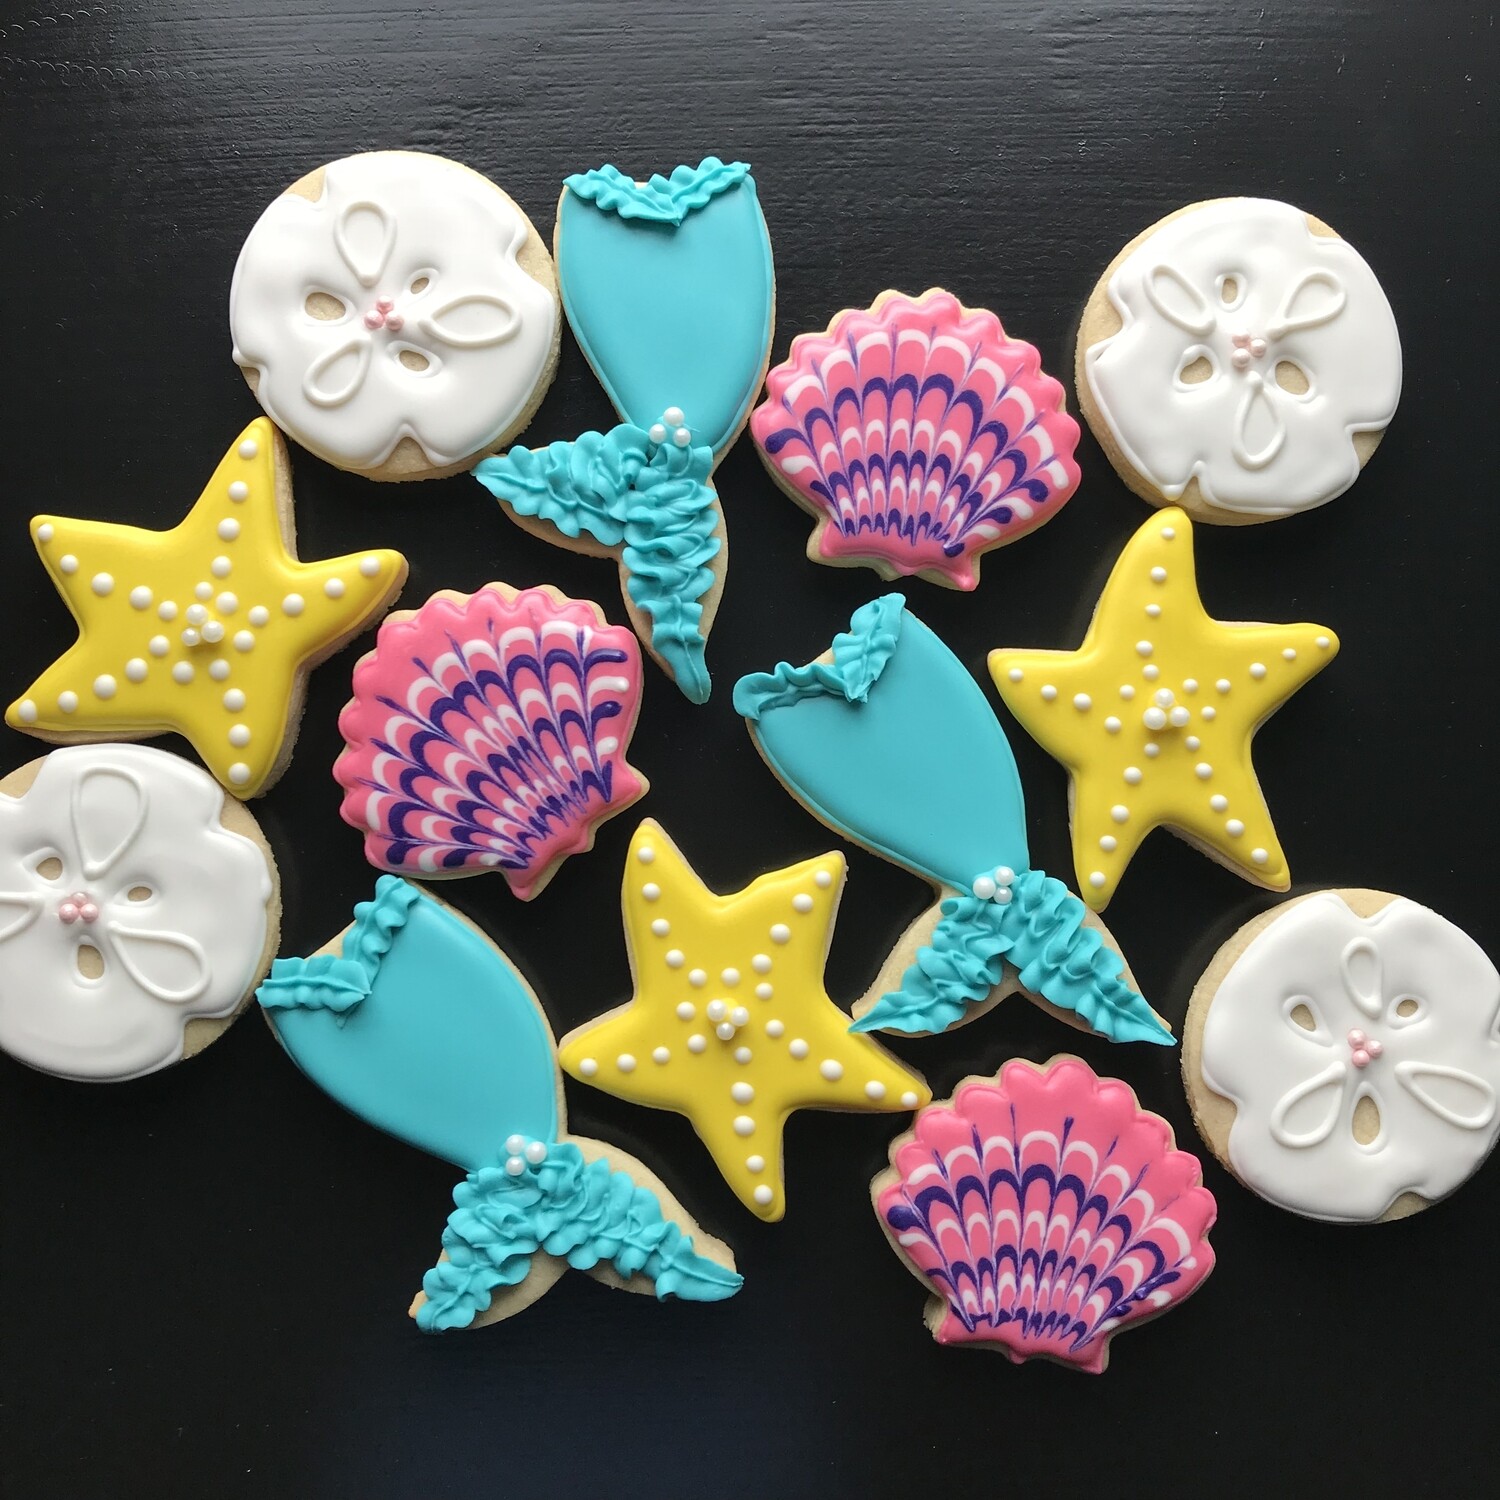 'AT THE BEACH Cookie Decorating Workshop - THURSDAY, MAY 18th at 6 p.m. (HOLLYTREE COUNTRY CLUB)